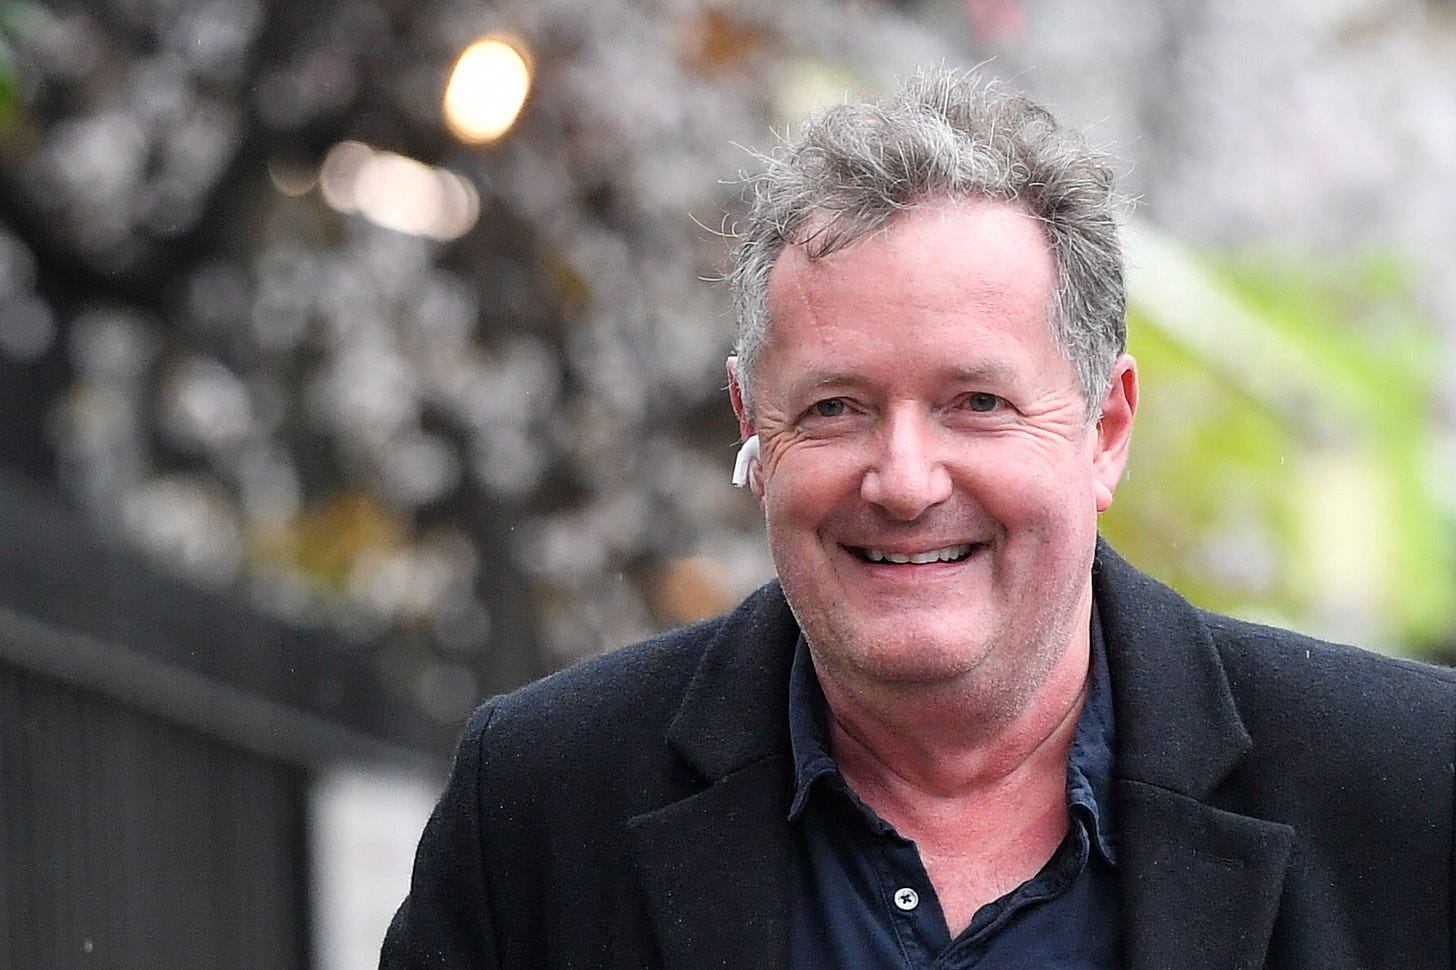 Journalist and television presenter Piers Morgan smiles as he walks near his house, after he left his high-profile breakfast slot with the broadcaster ITV, following his long-running criticism of Prince Harry's wife Meghan, in London, Britain, March 10, 2021. REUTERS/Toby Melville